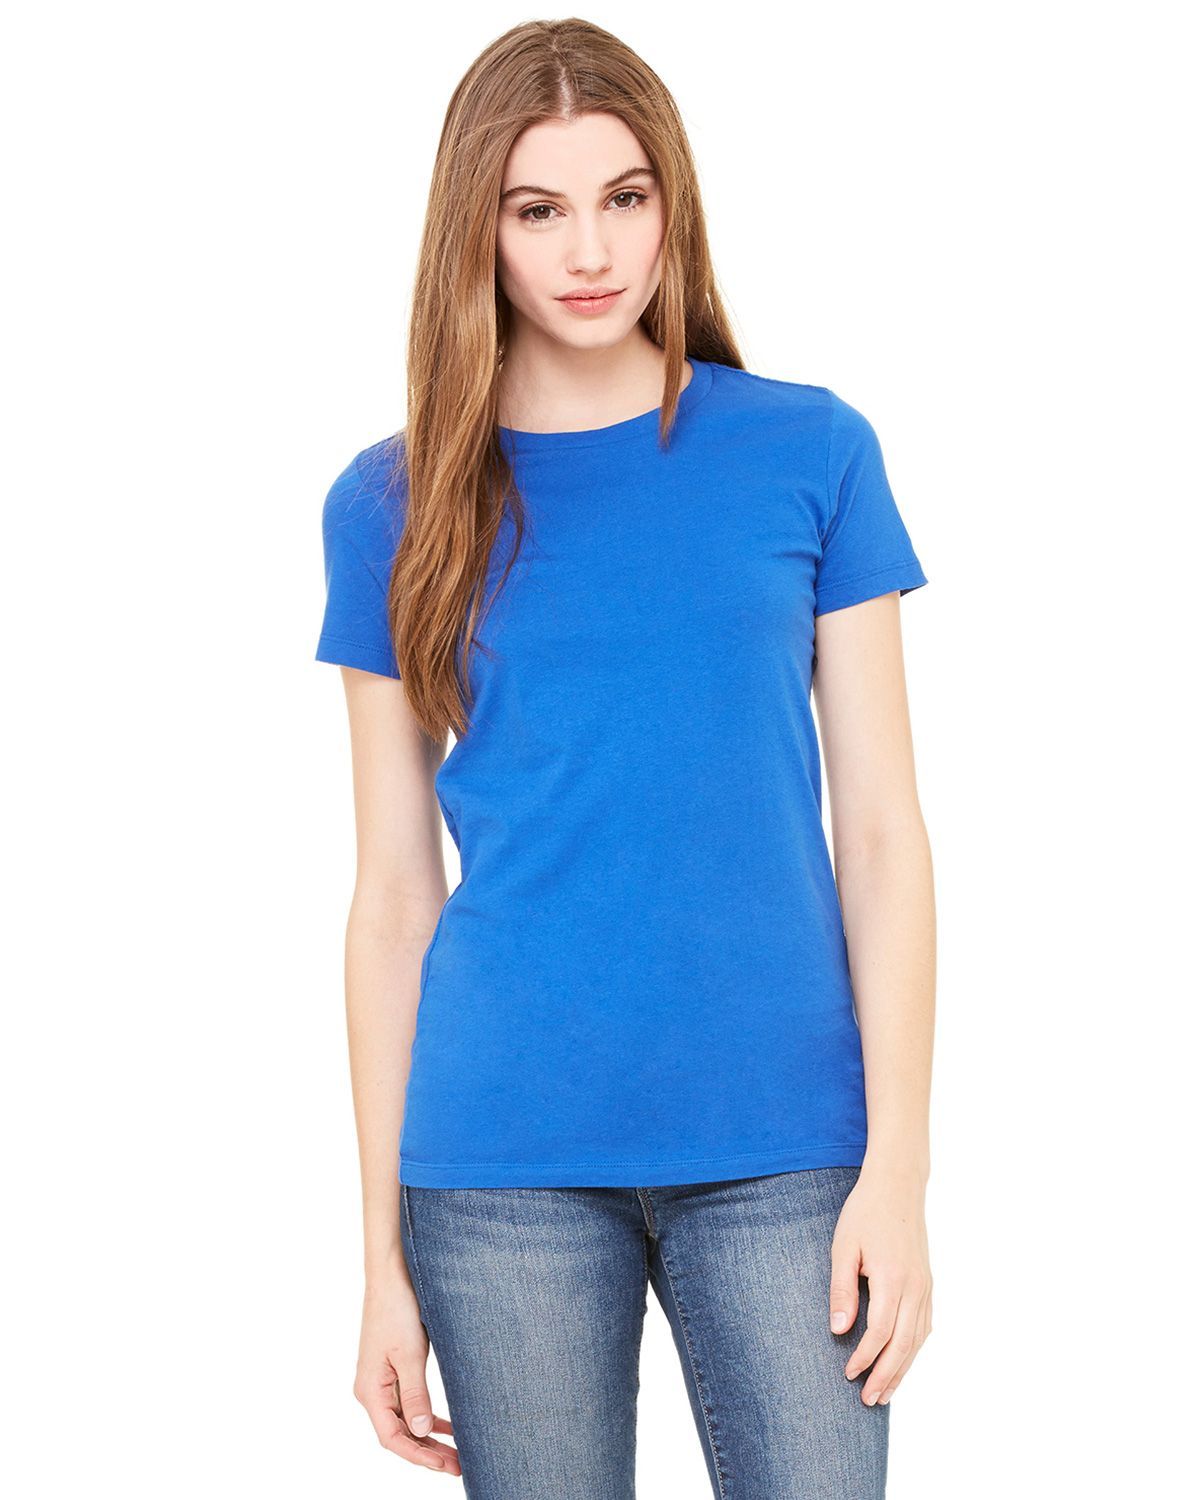 Bella + Canvas 6004U Ladies Made in the USA Favorite T-Shirt